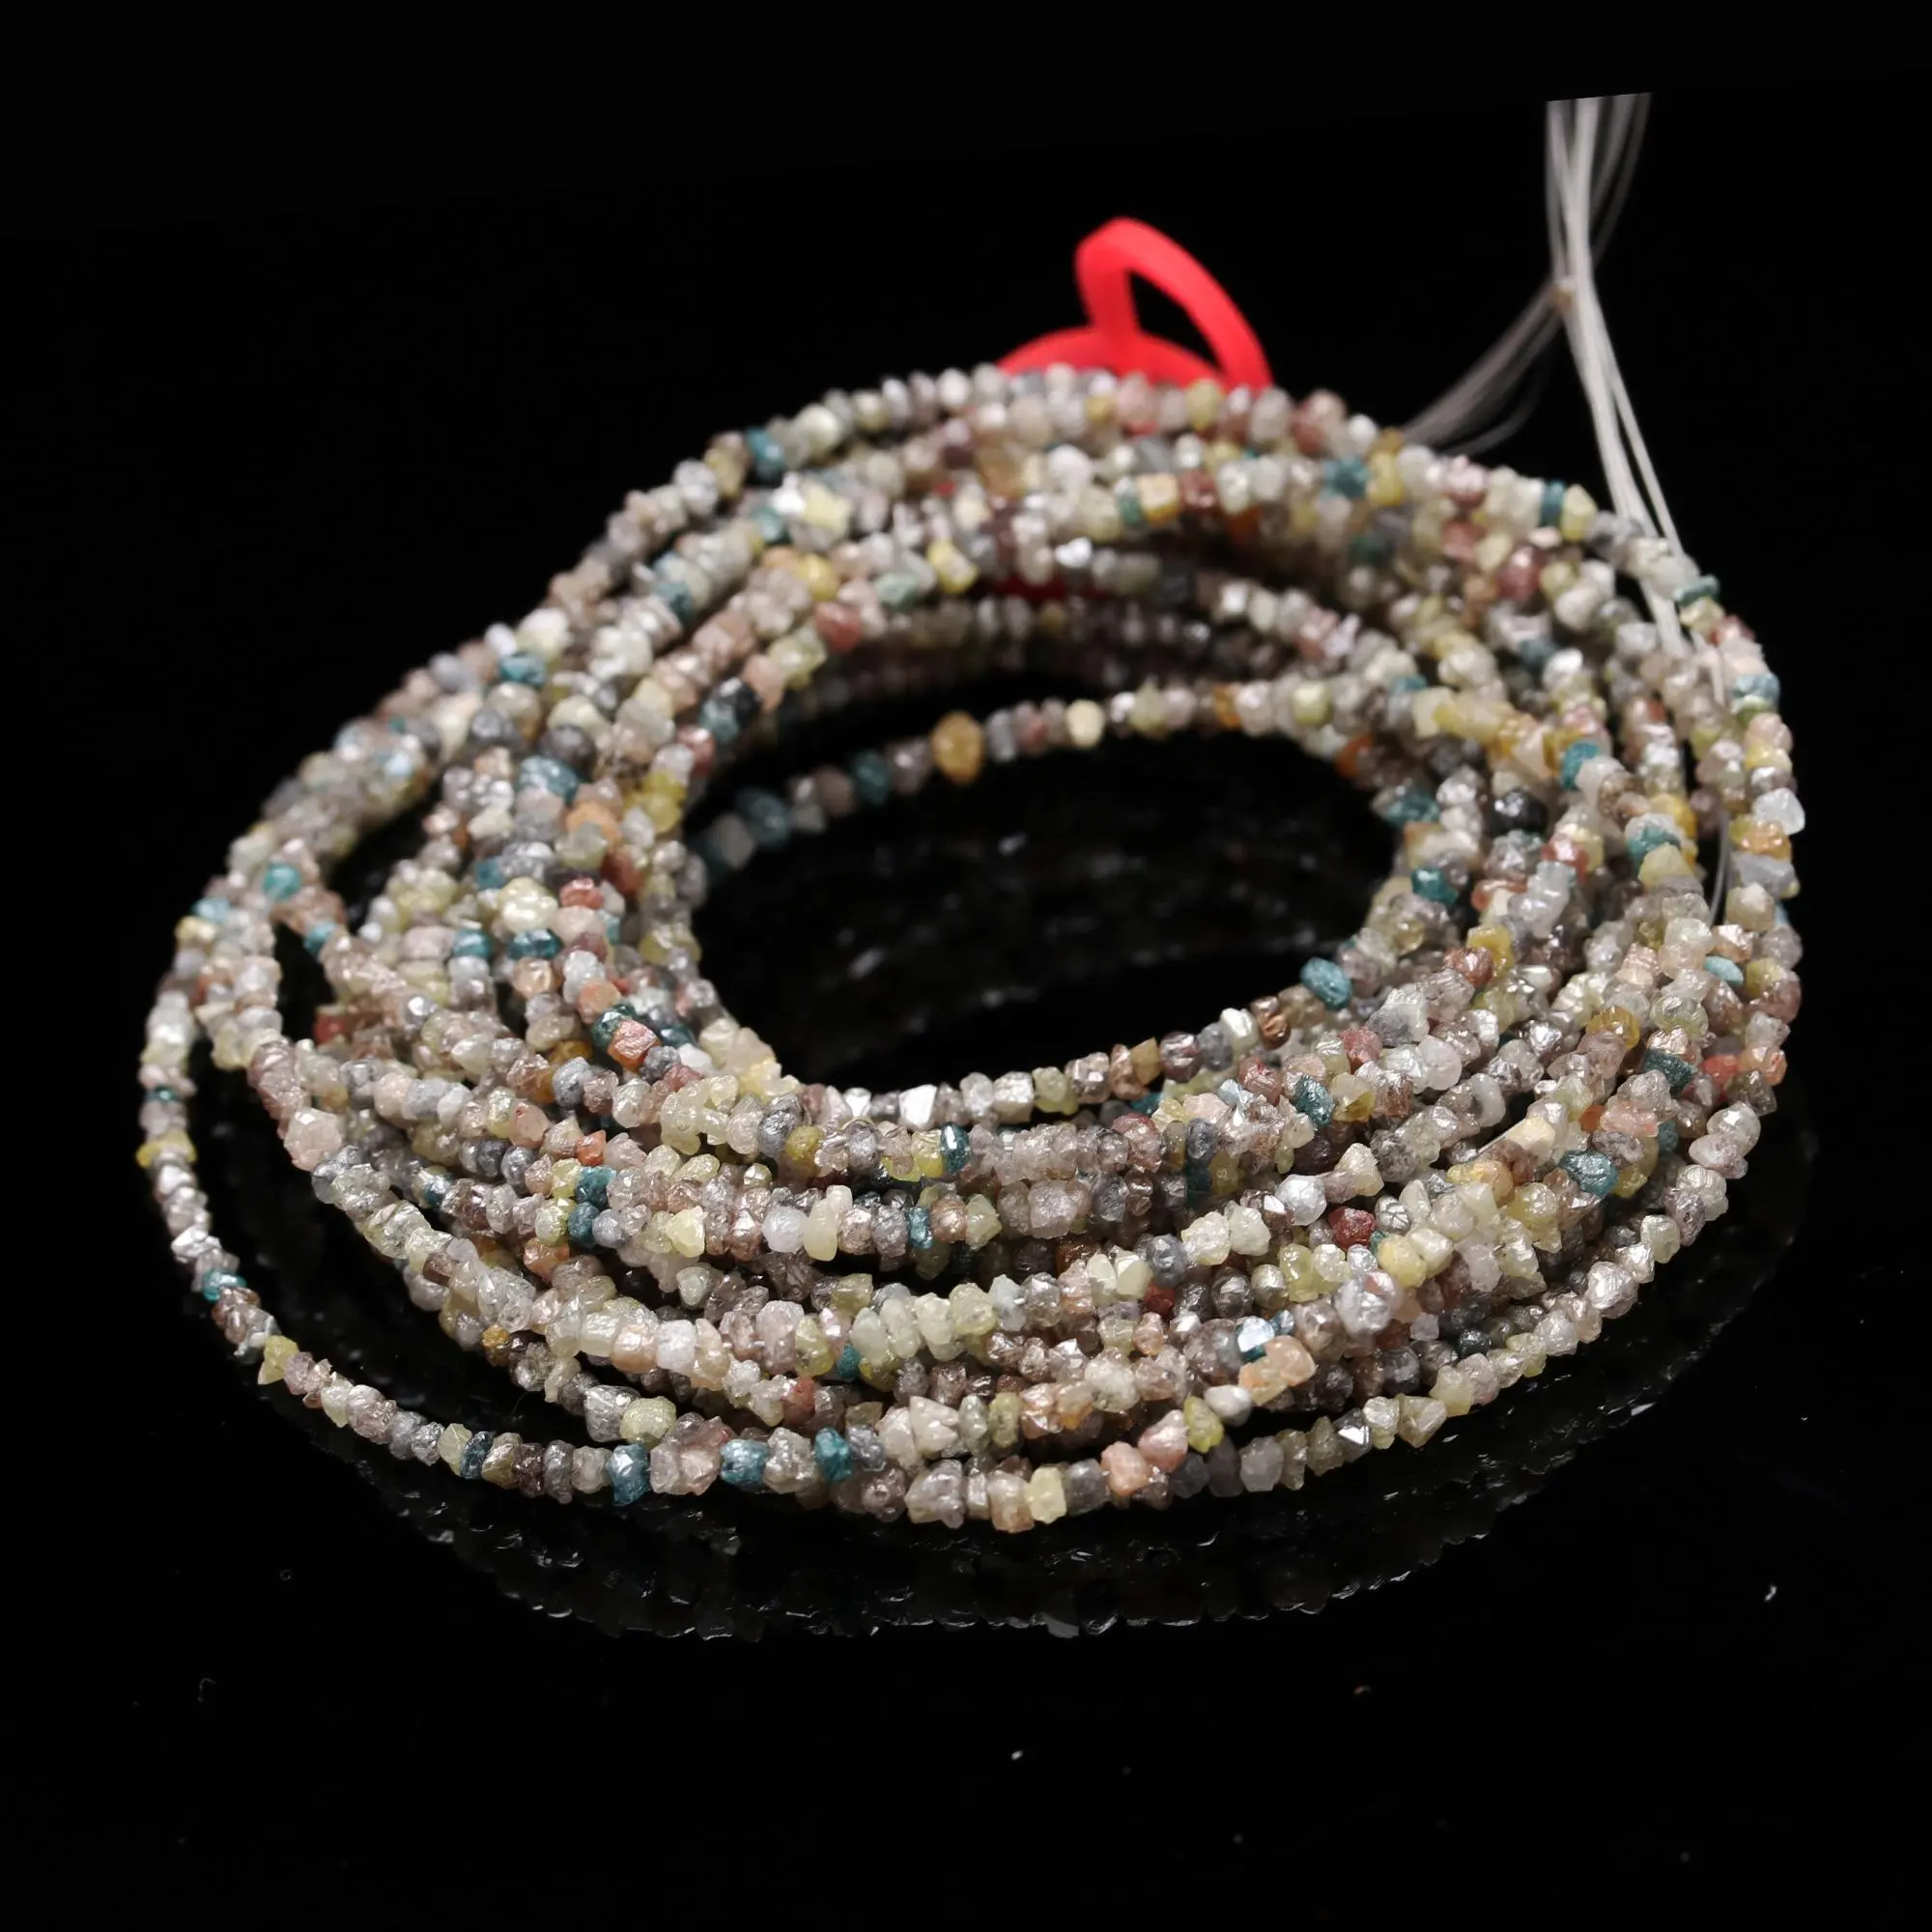 100% Natural Multi-Color Diamond 2 - 3 mm Uncut Diamond Beads for Jewelry Making Natural Loose Diamond Beads